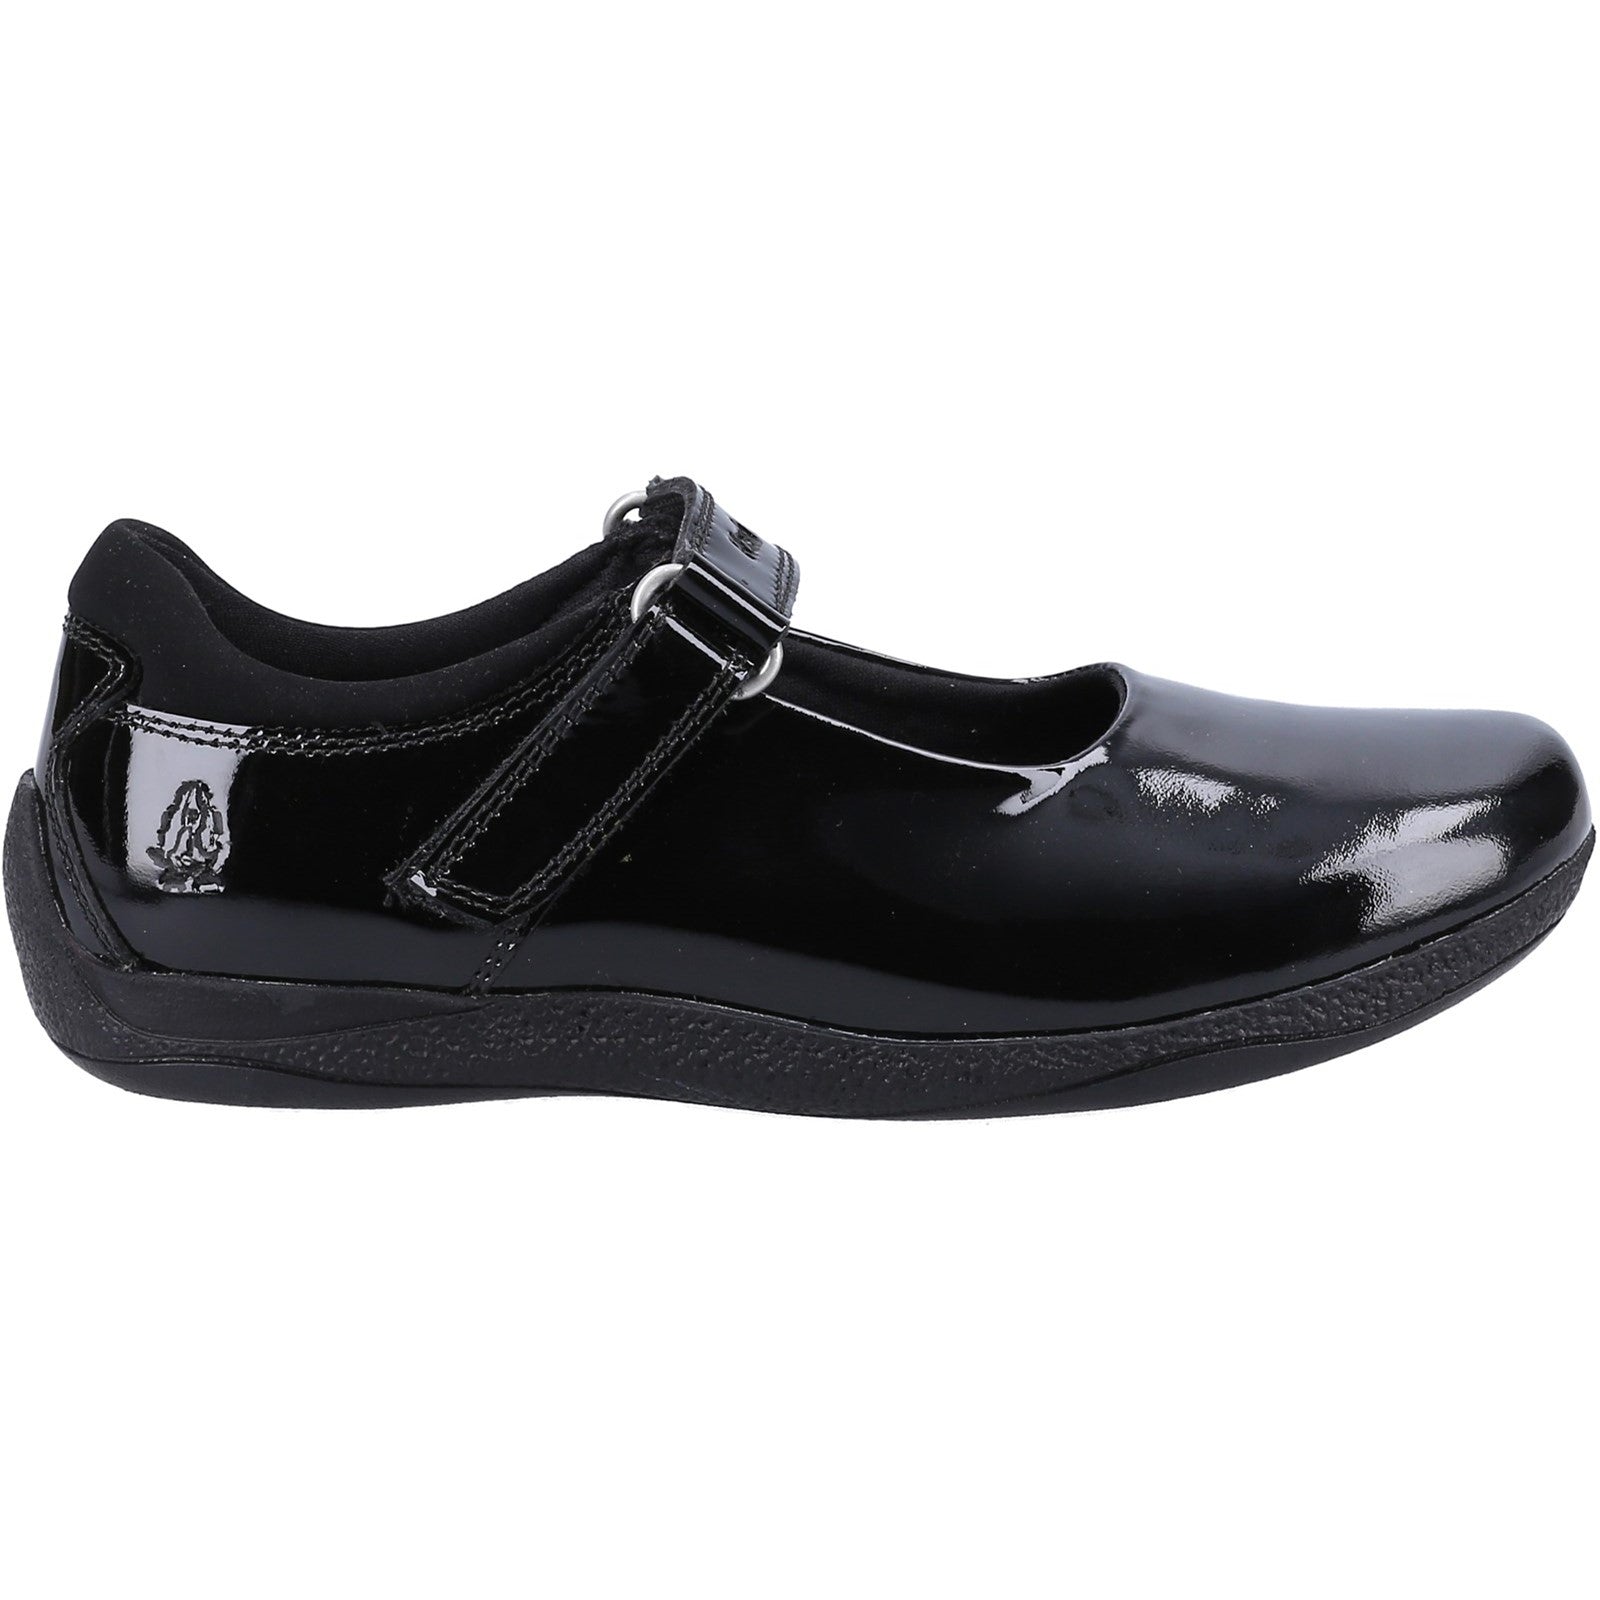 Hush Puppies Girls Marcie Patent Leather School Shoes - Black